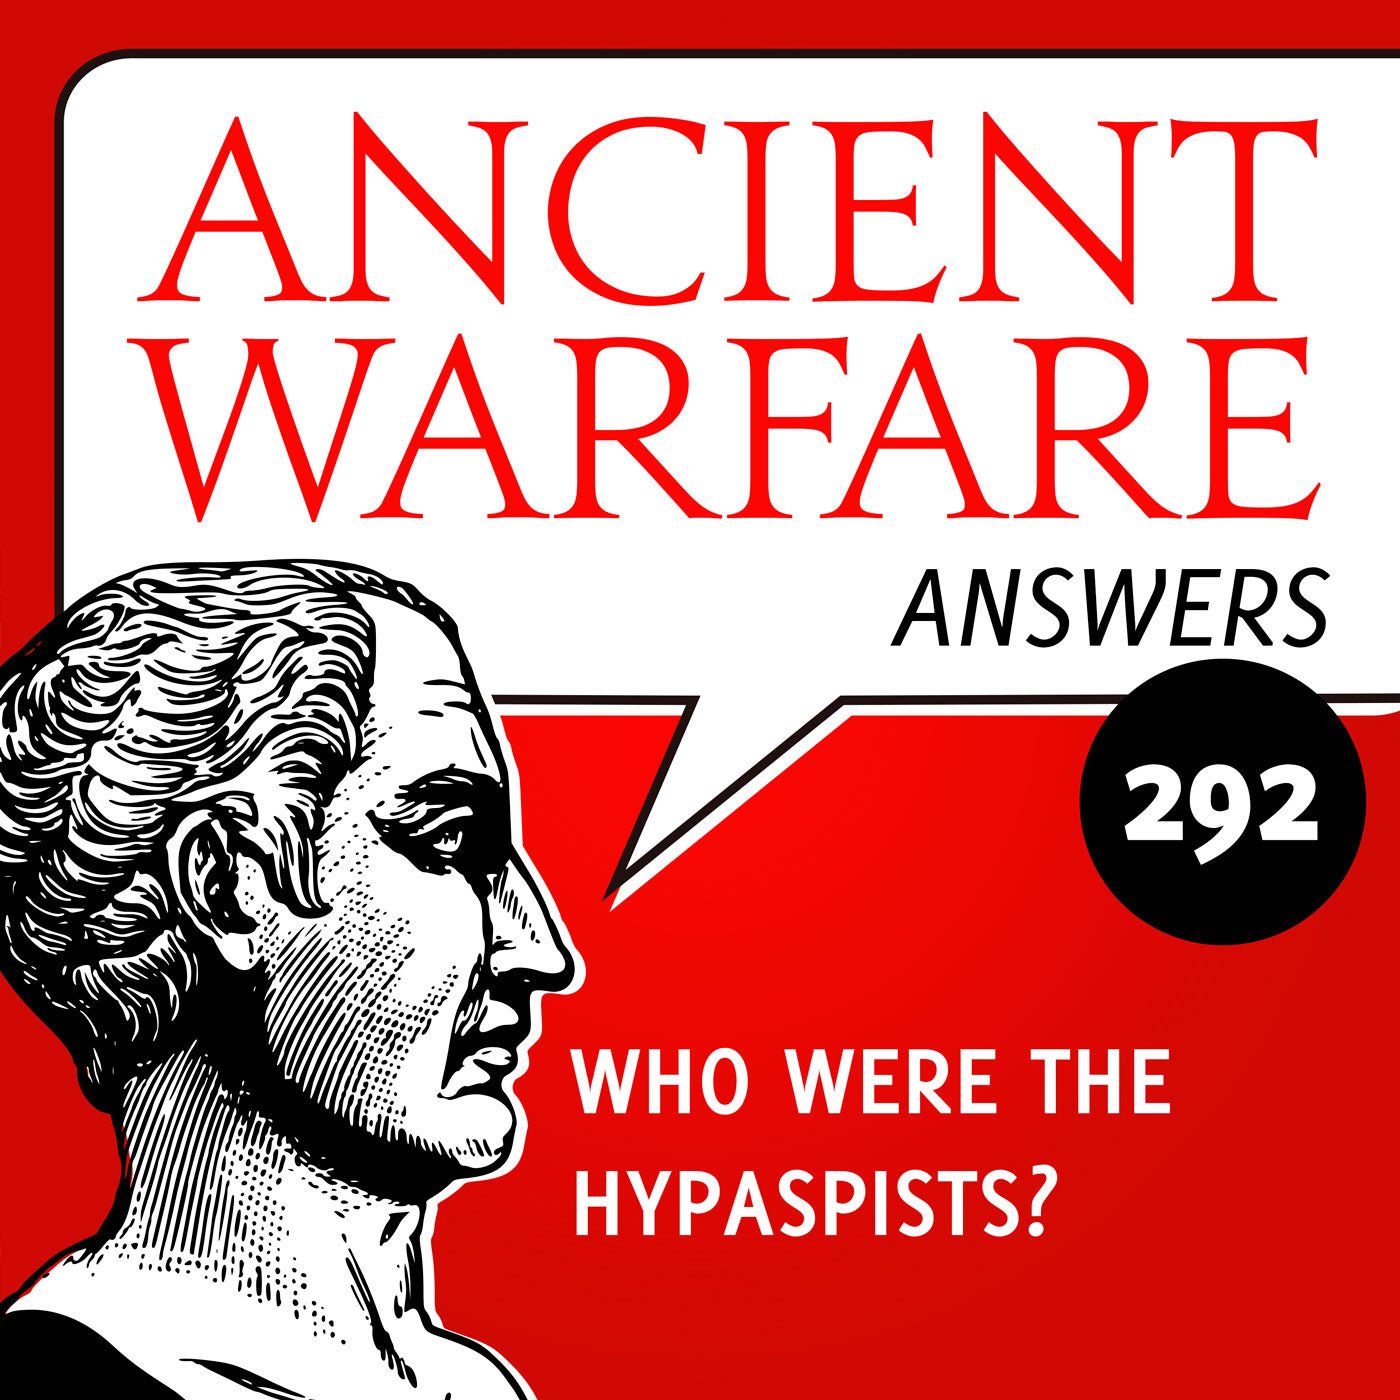 Ancient Warfare Answers (292): Who were the Hypaspists?